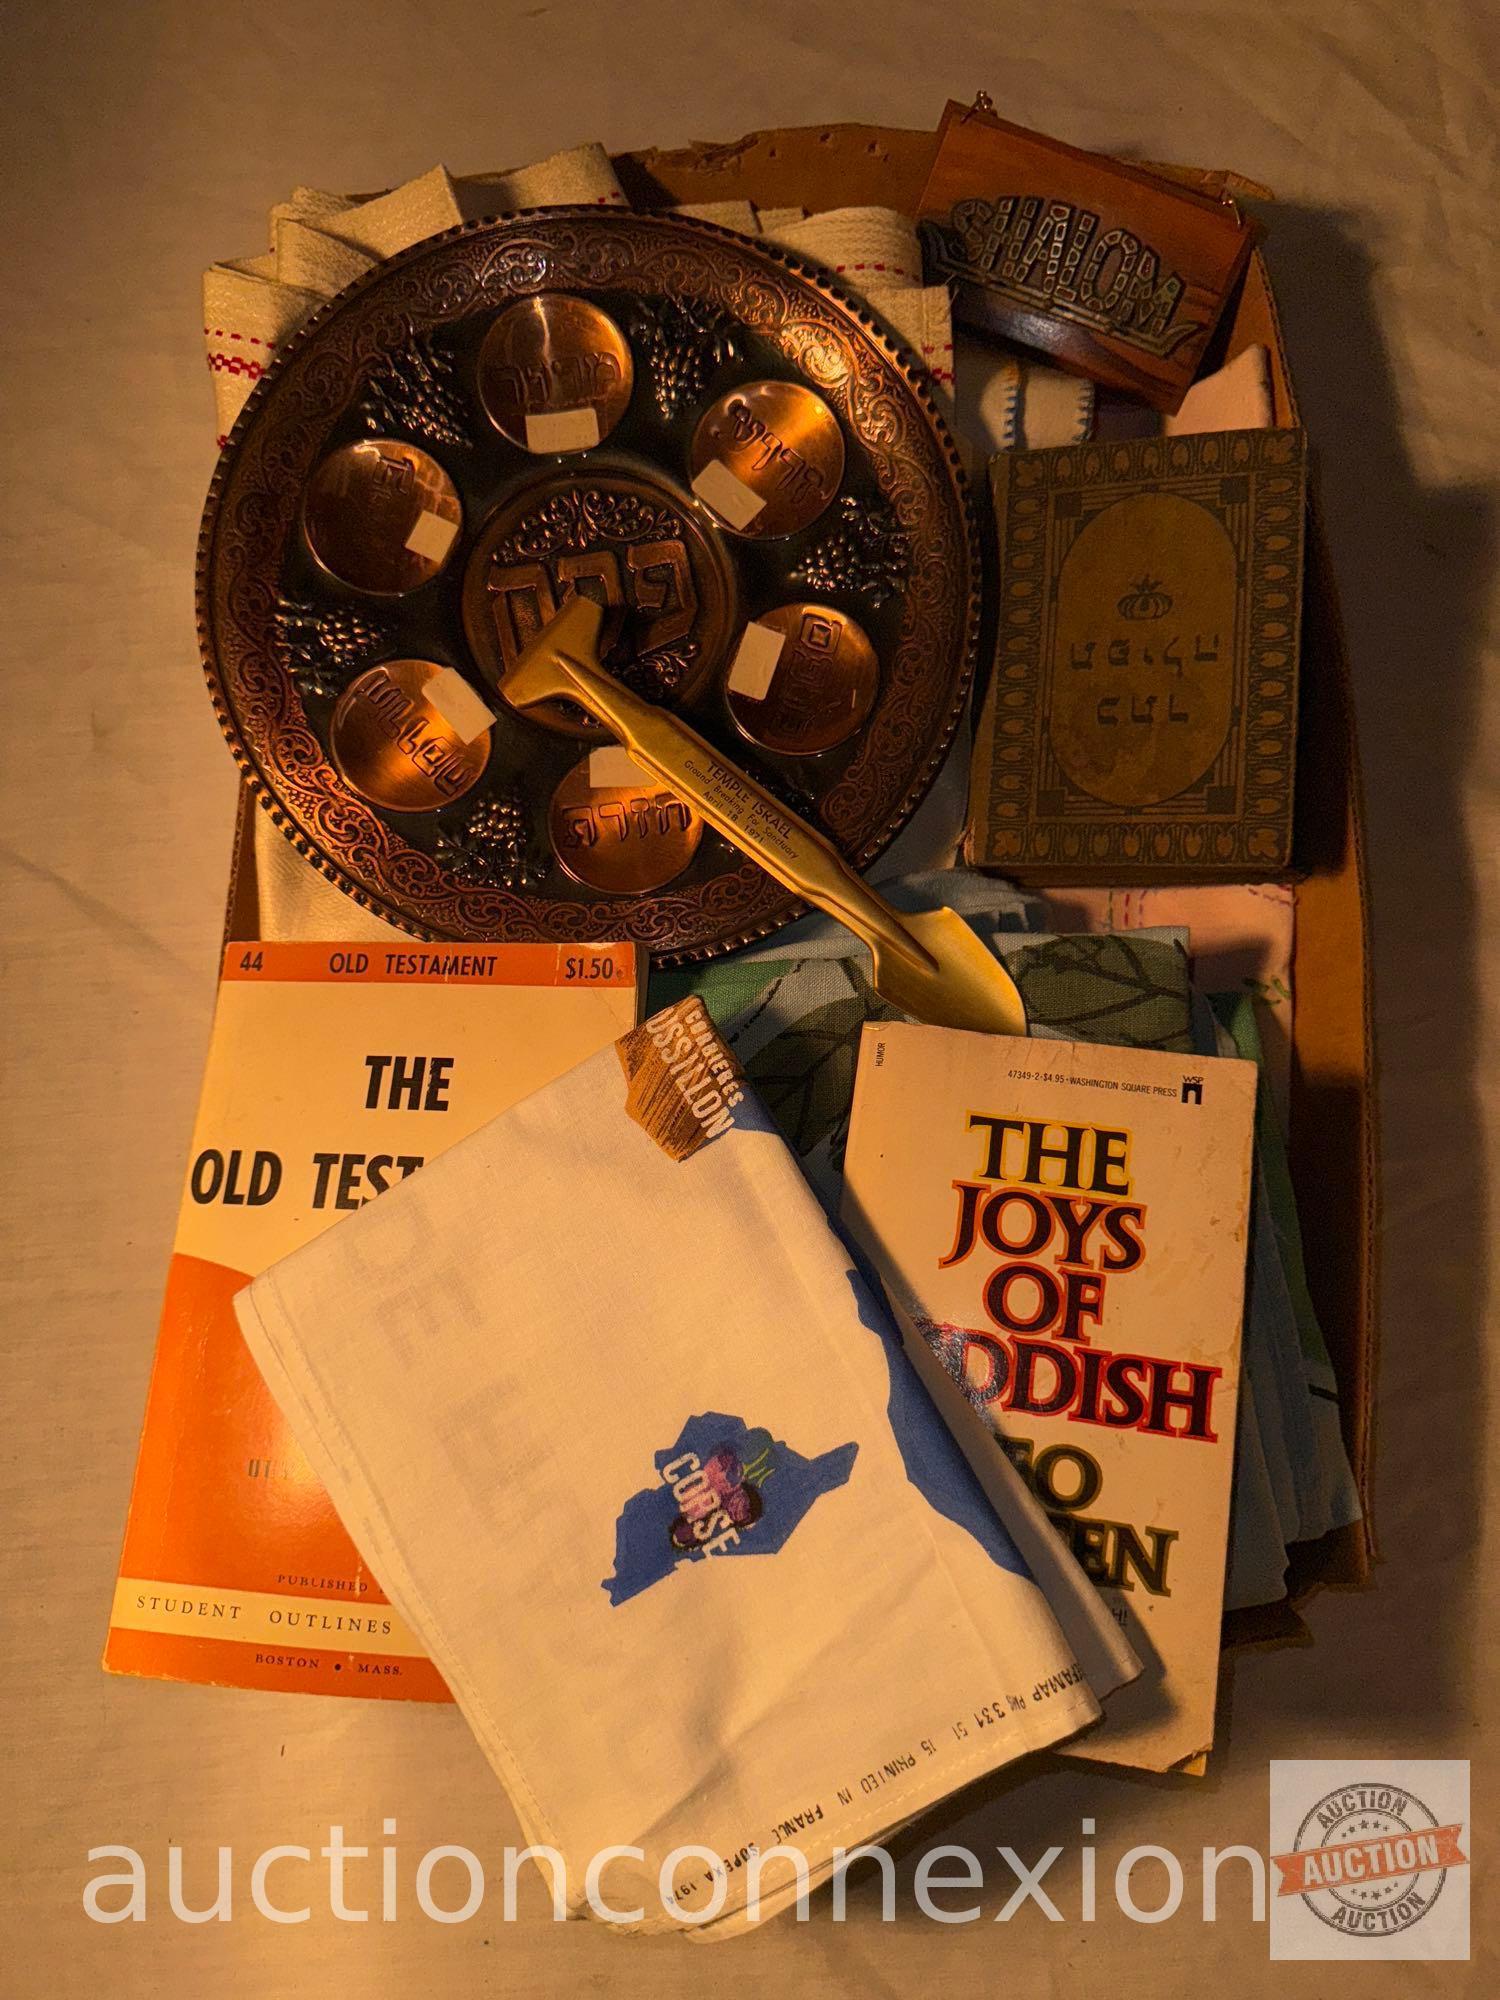 Linens, Jewish plate and books